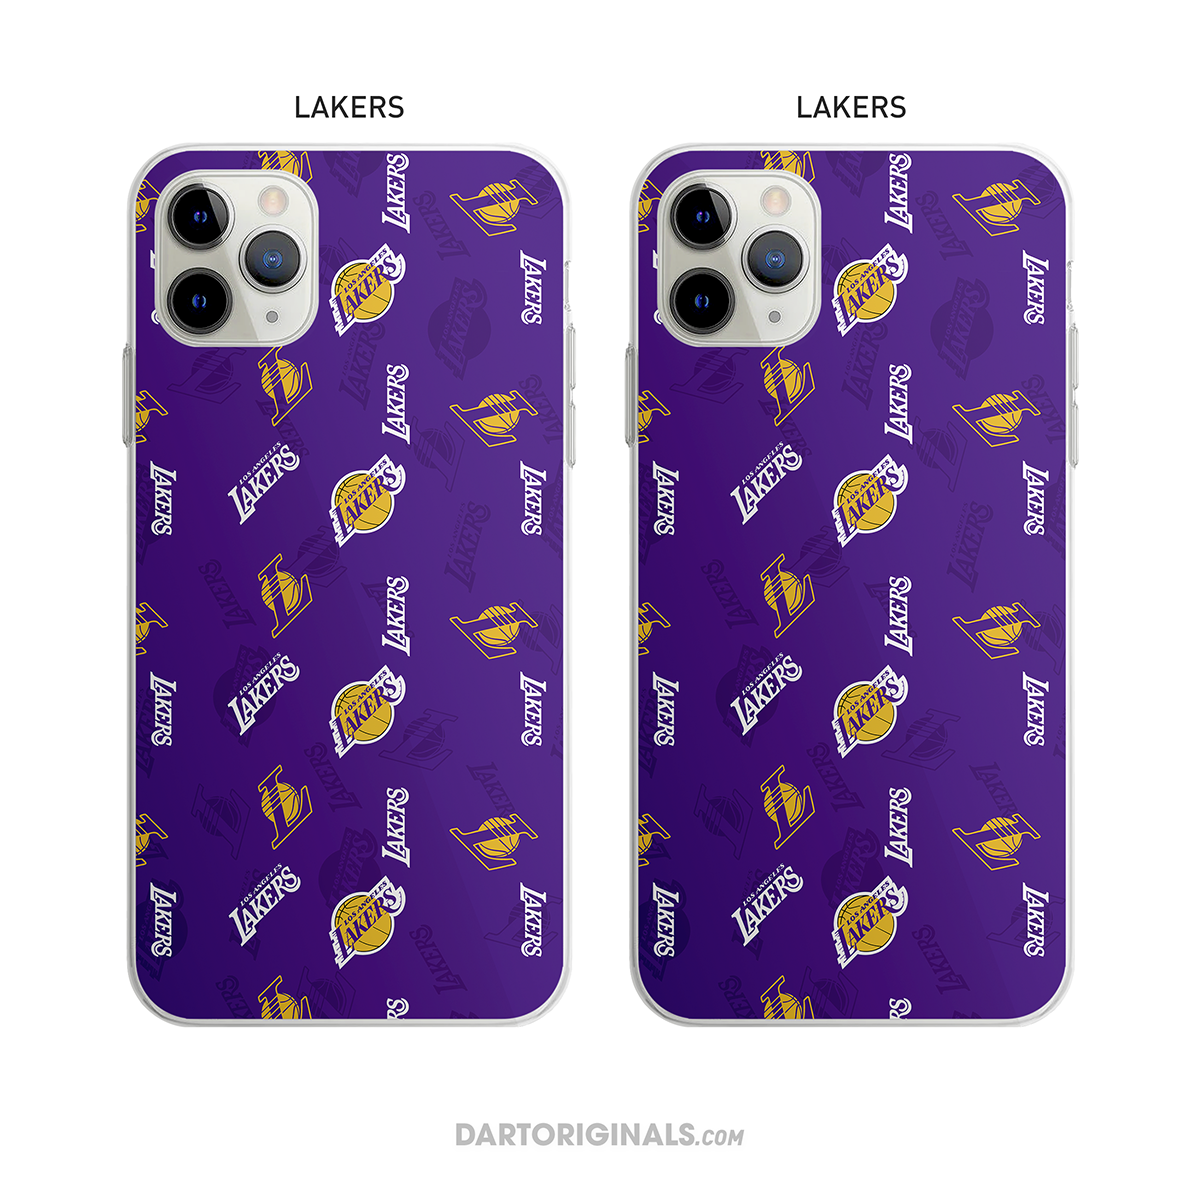 Lakers: Sticker Edition